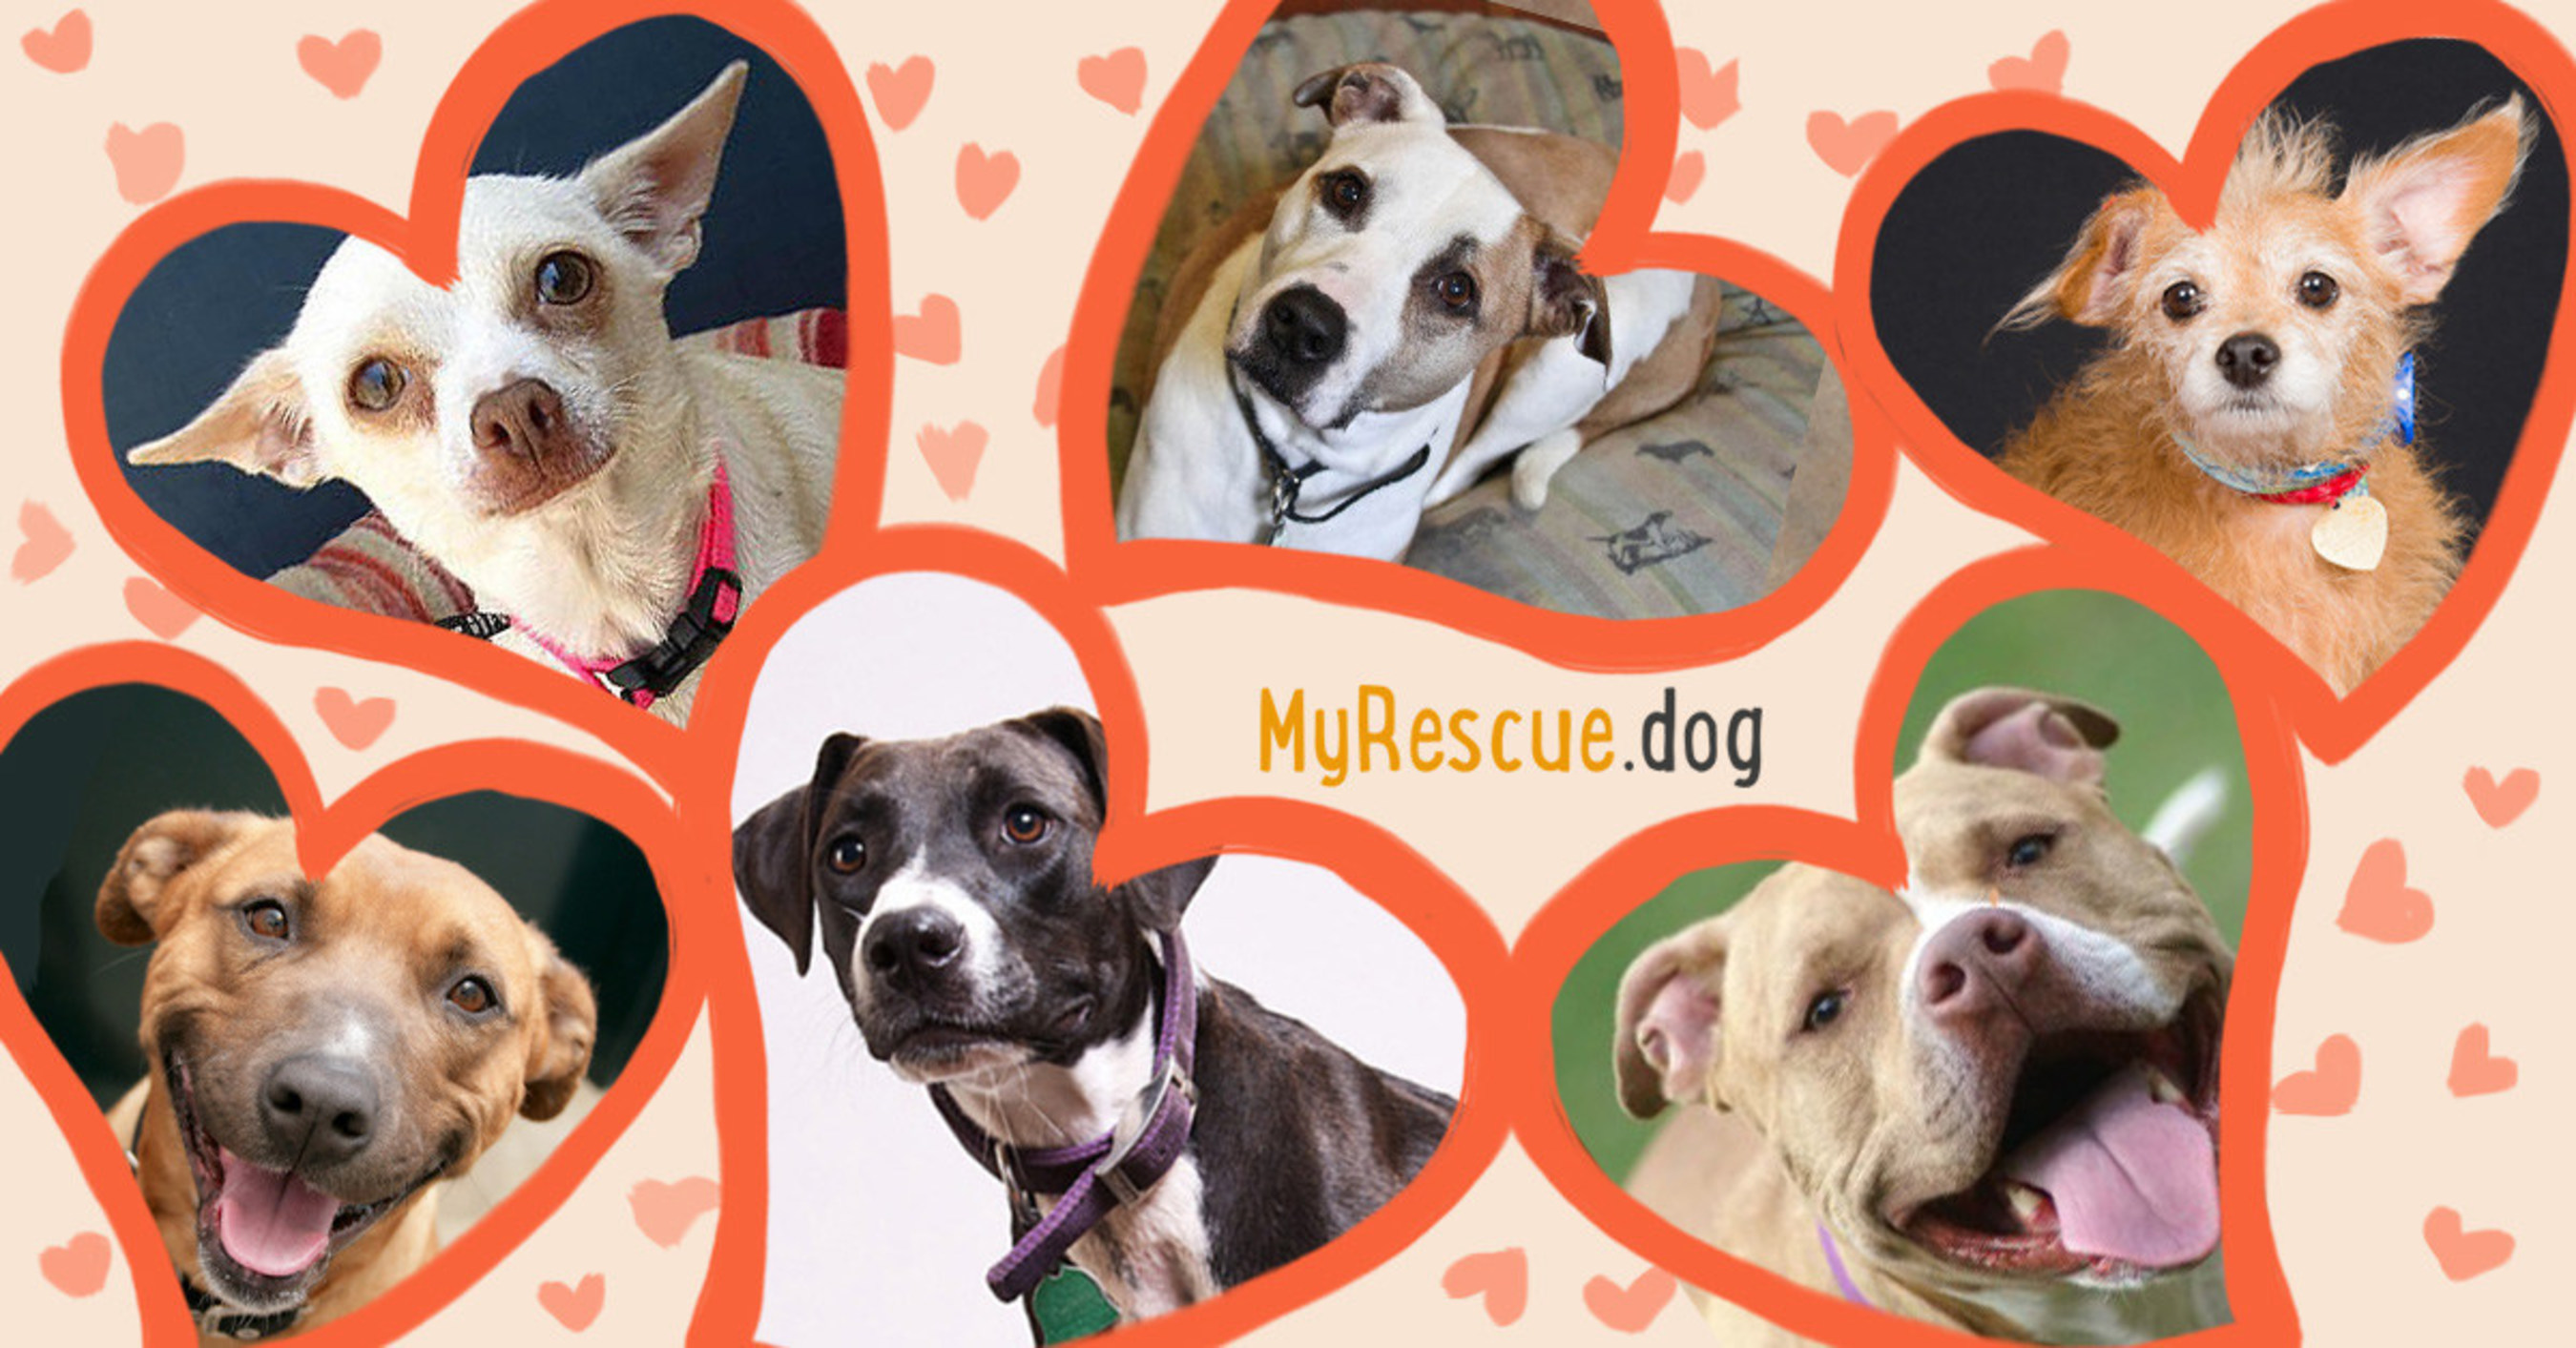 Help homeless dogs by posting your rescue dog photos & voting on your favorites at MyRescue.dog